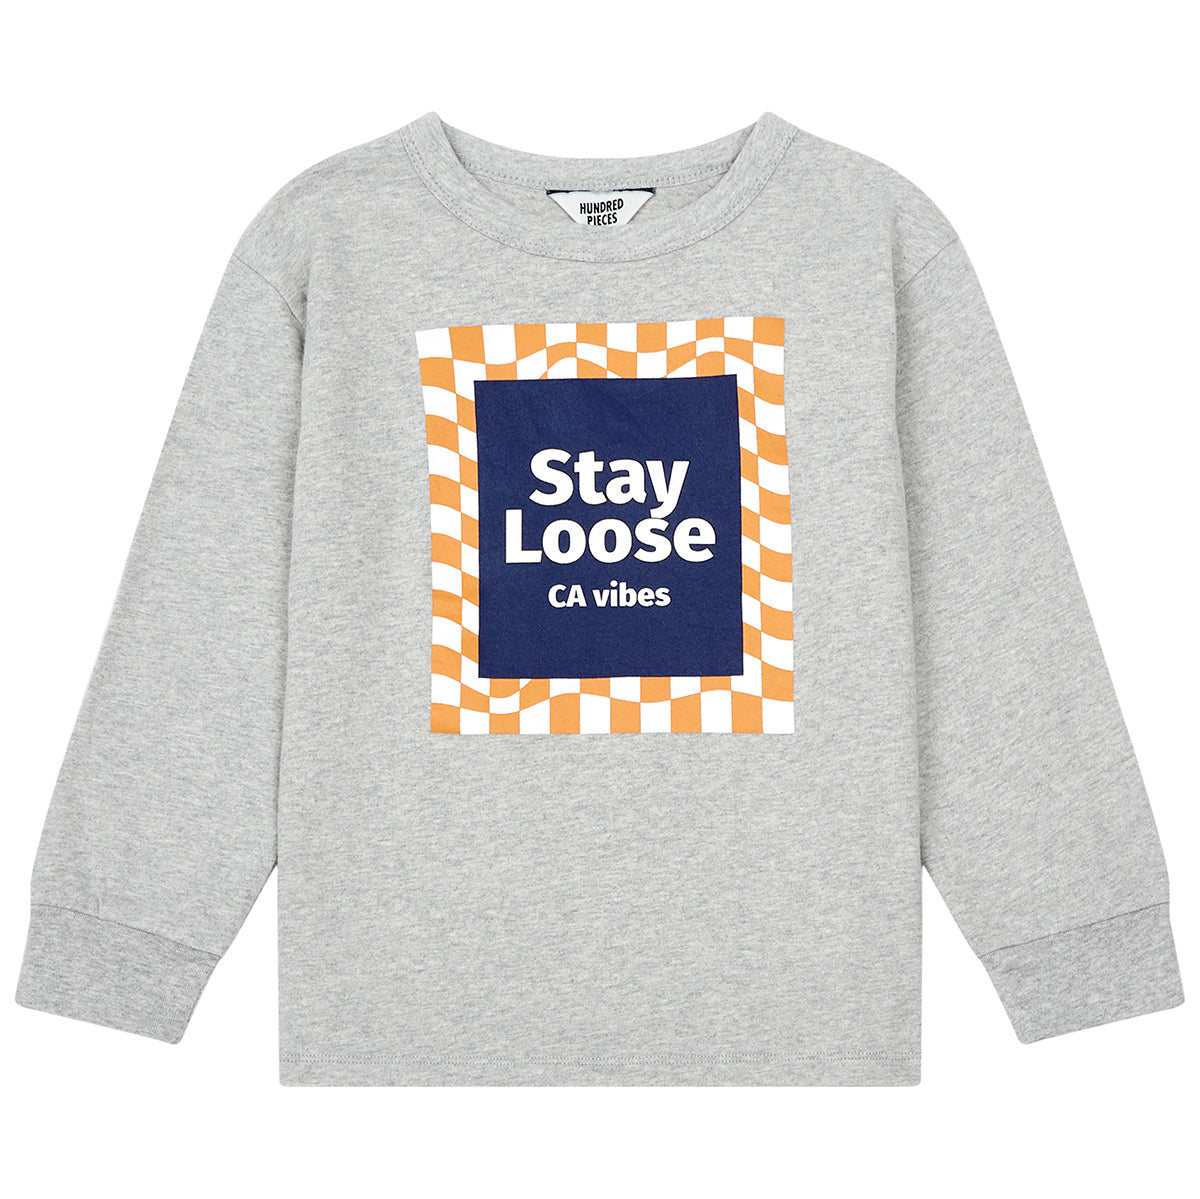 Hundred Pieces Hundred Pieces Stay Loose Long Sleeve T-shirt